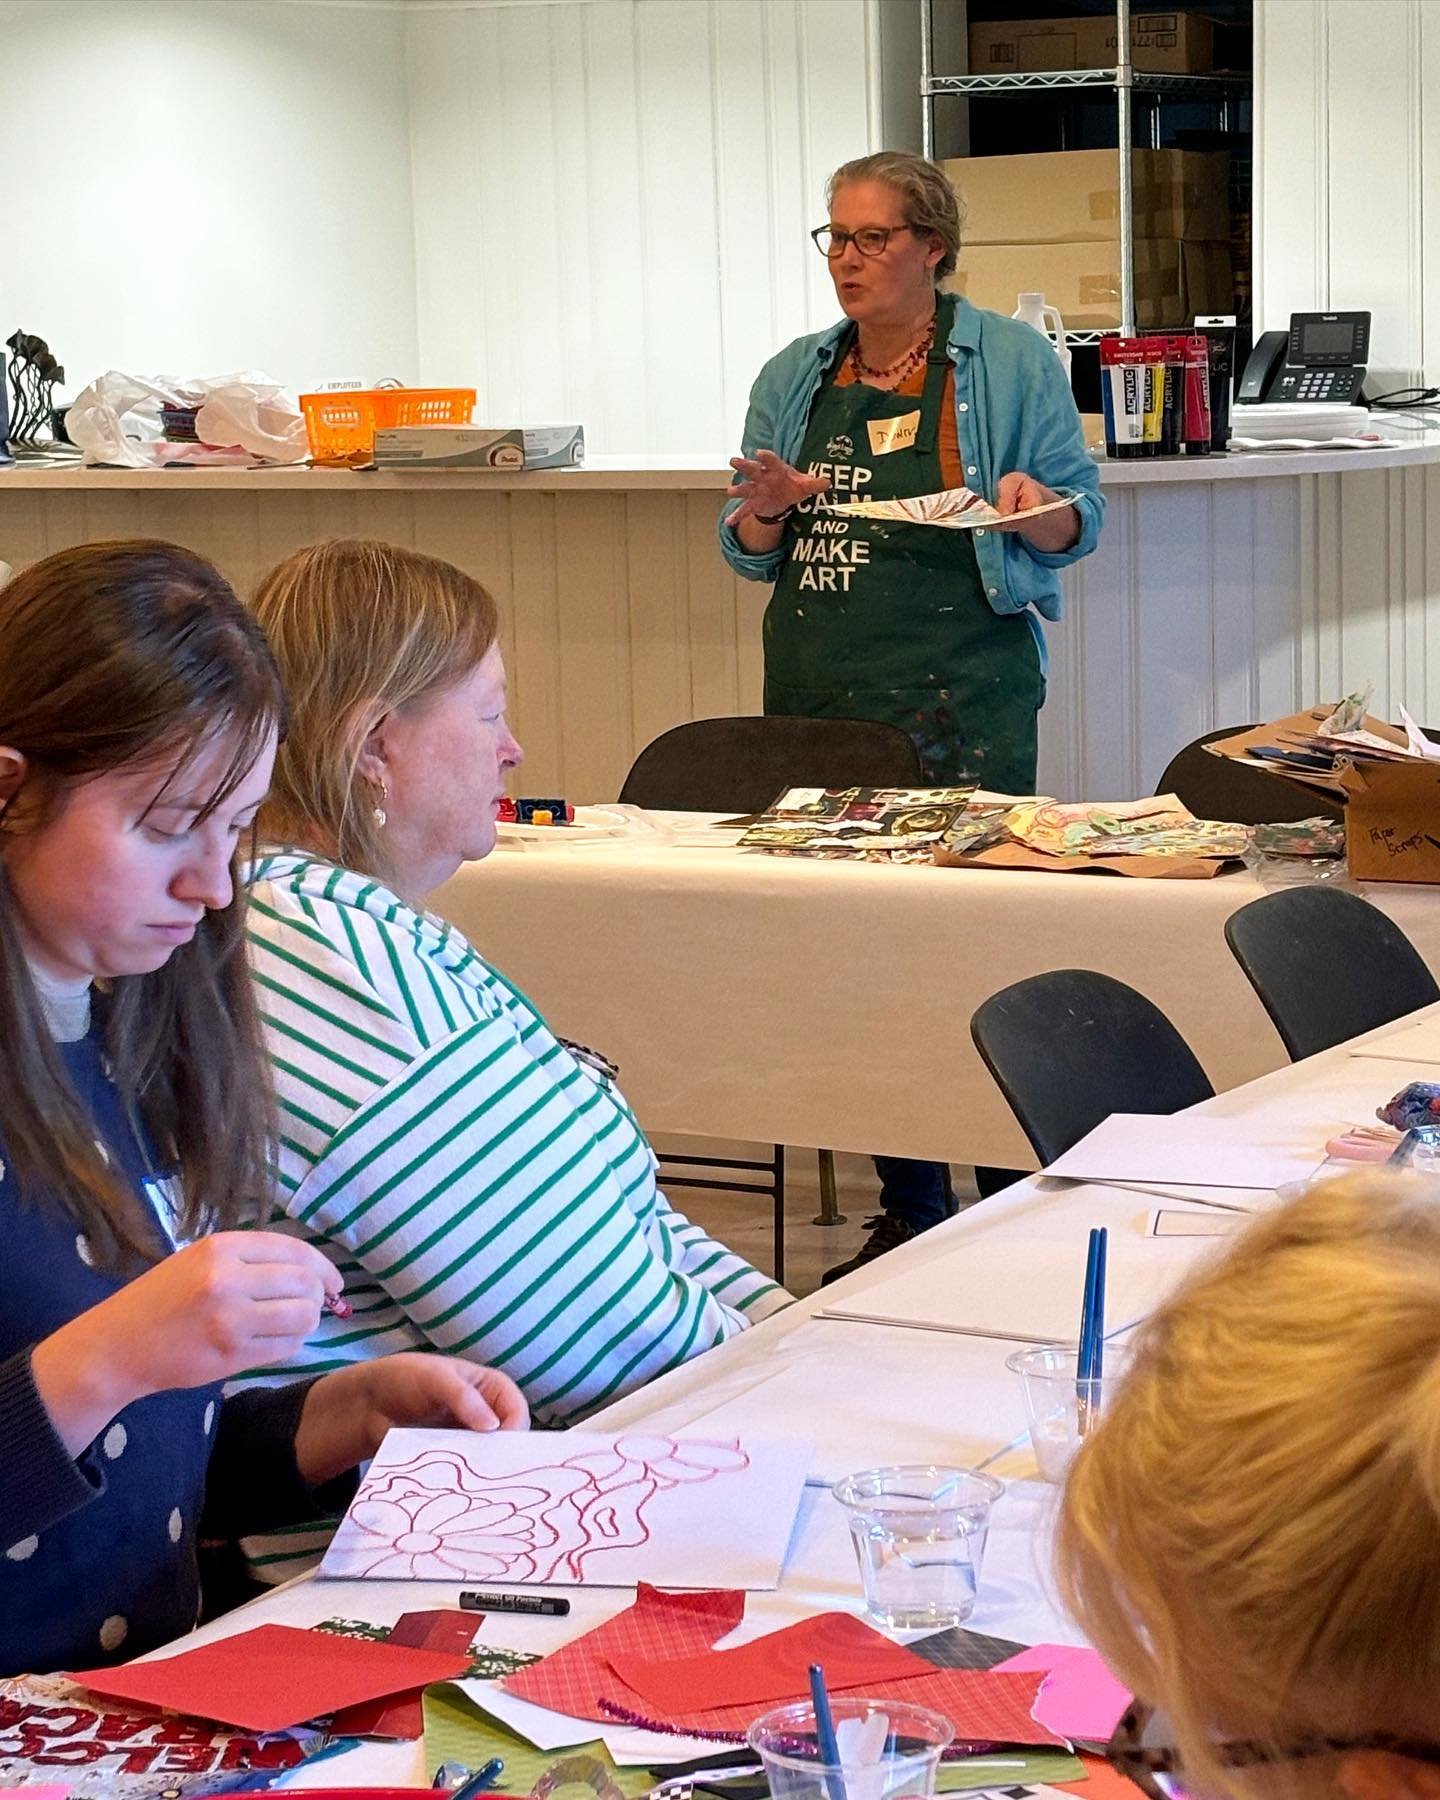 Yesterday I had the privilege of teaching a mixed media collage workshop at the Dublin Arts Council as part of their community engagement events for our exhibition, Echoes of Memory.  It was so fun and the participants created such amazing work!  Man